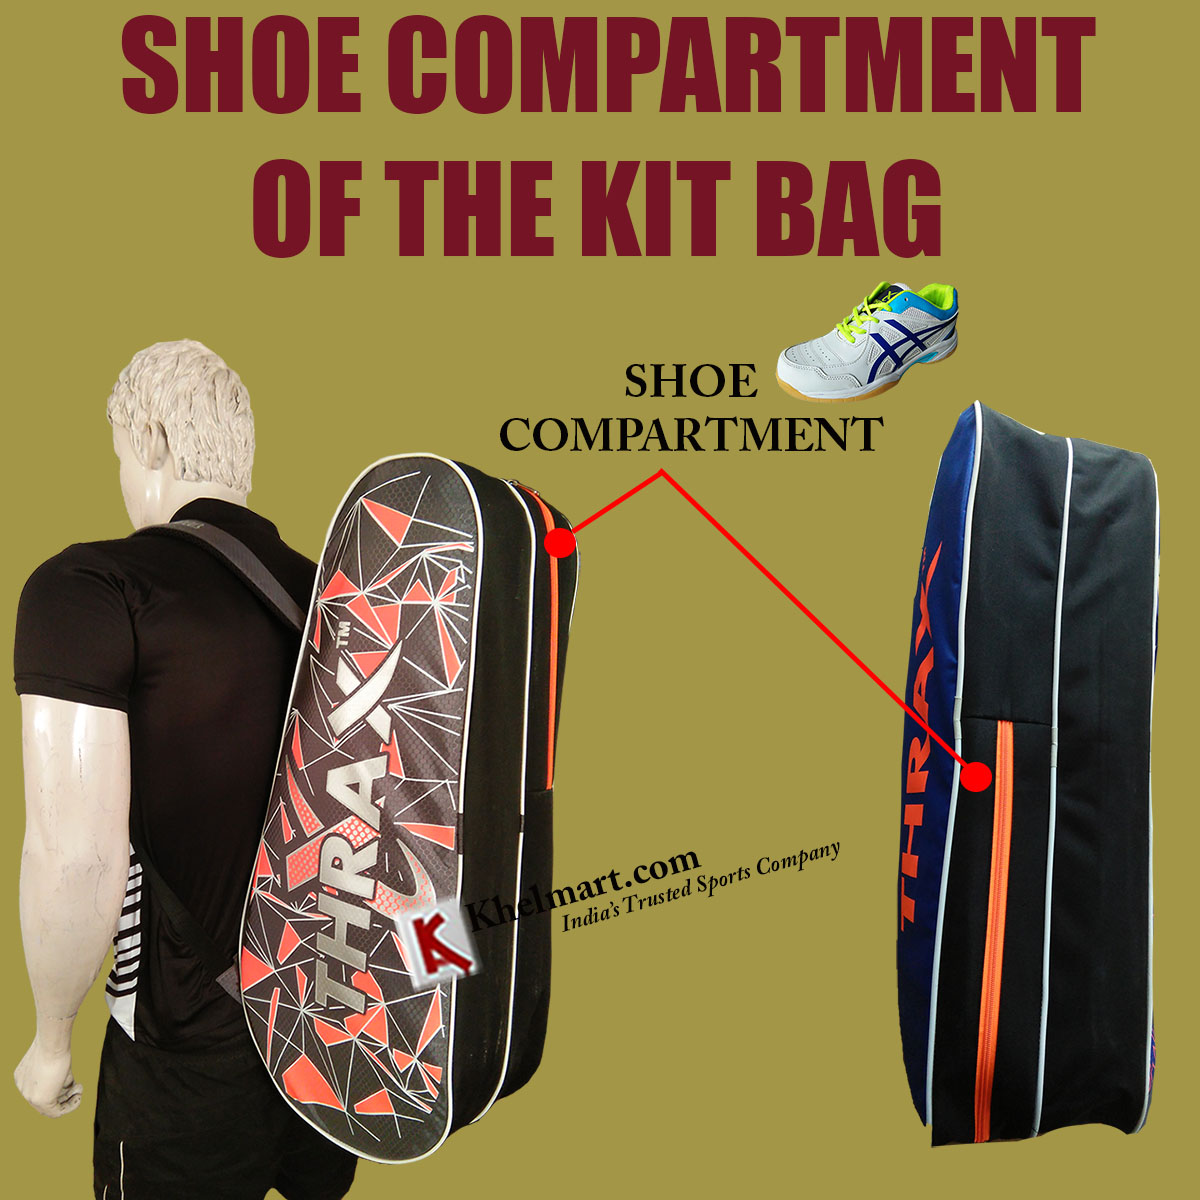 SHOE_COMPARTMENTS_OF_THE_KIT_BAG.jpg